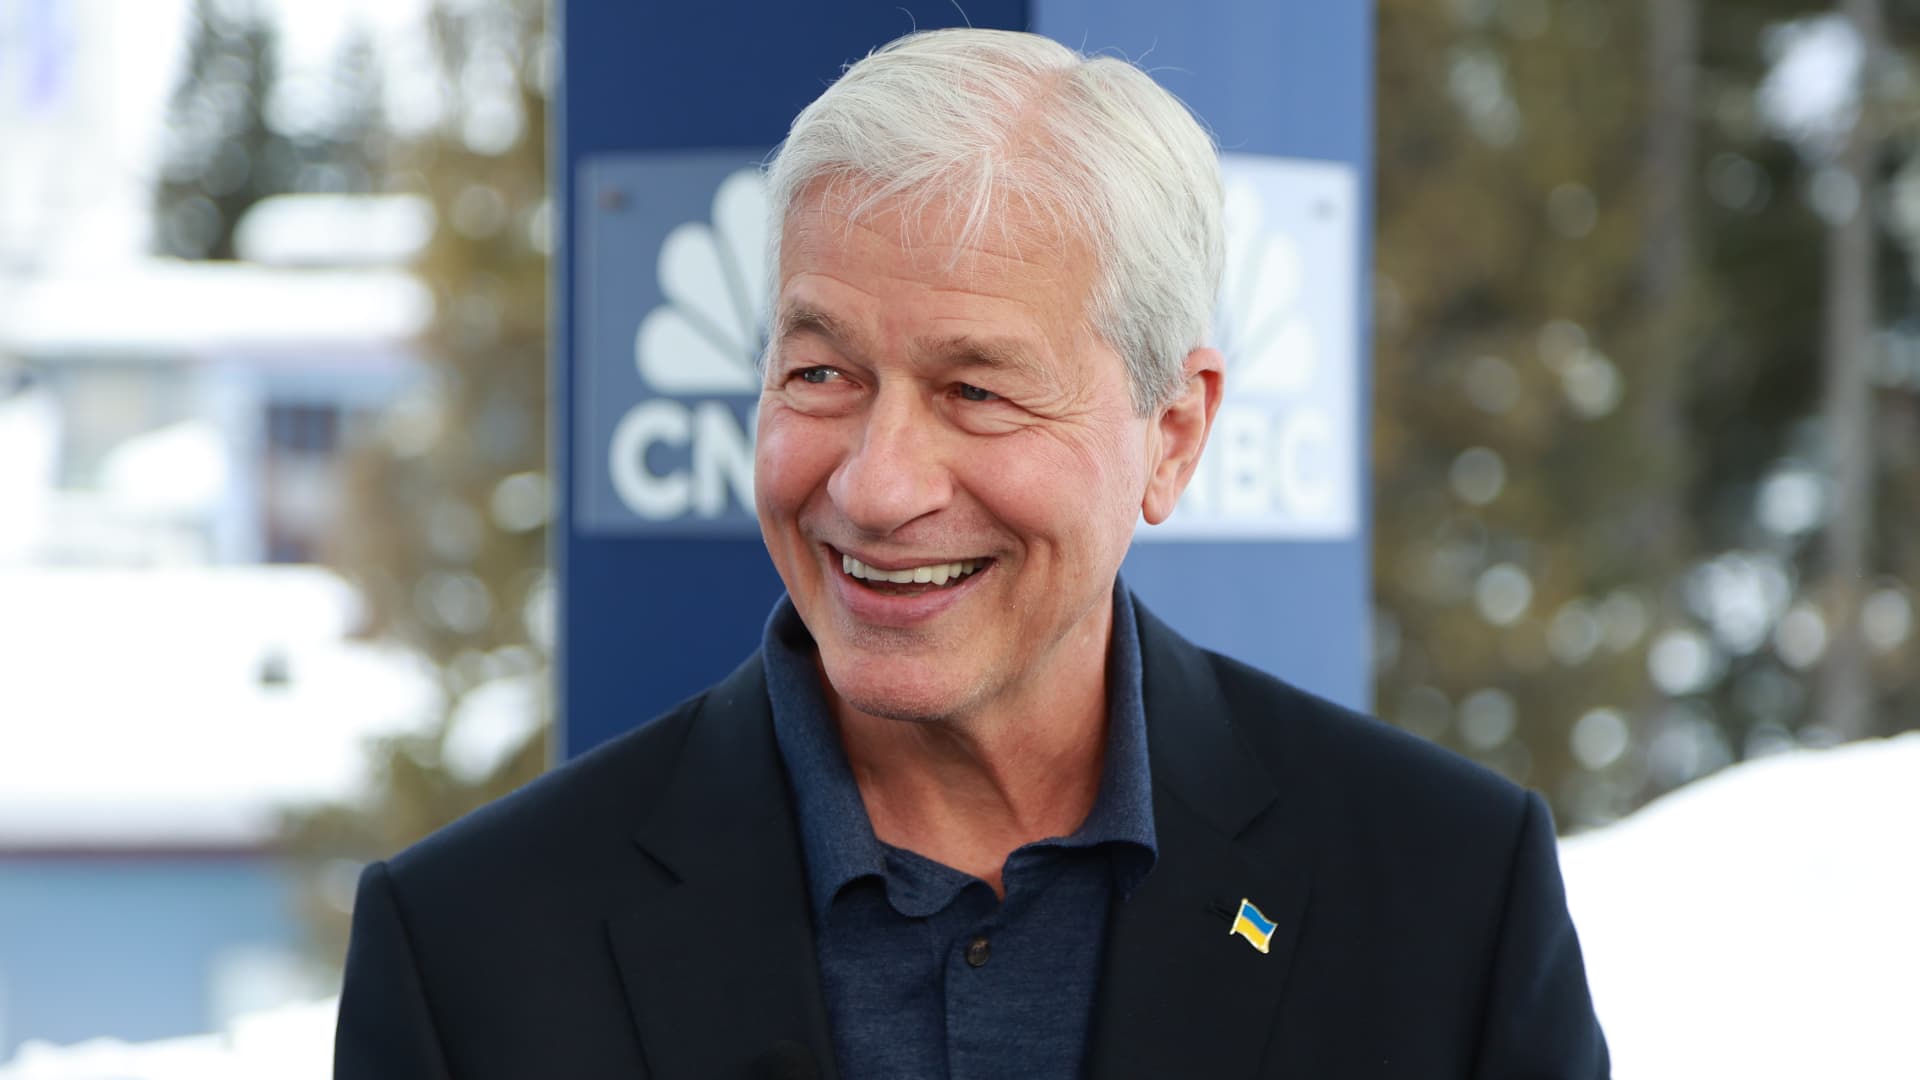 Jamie Dimon on Capital One Discover deal: ‘Let them competeâ